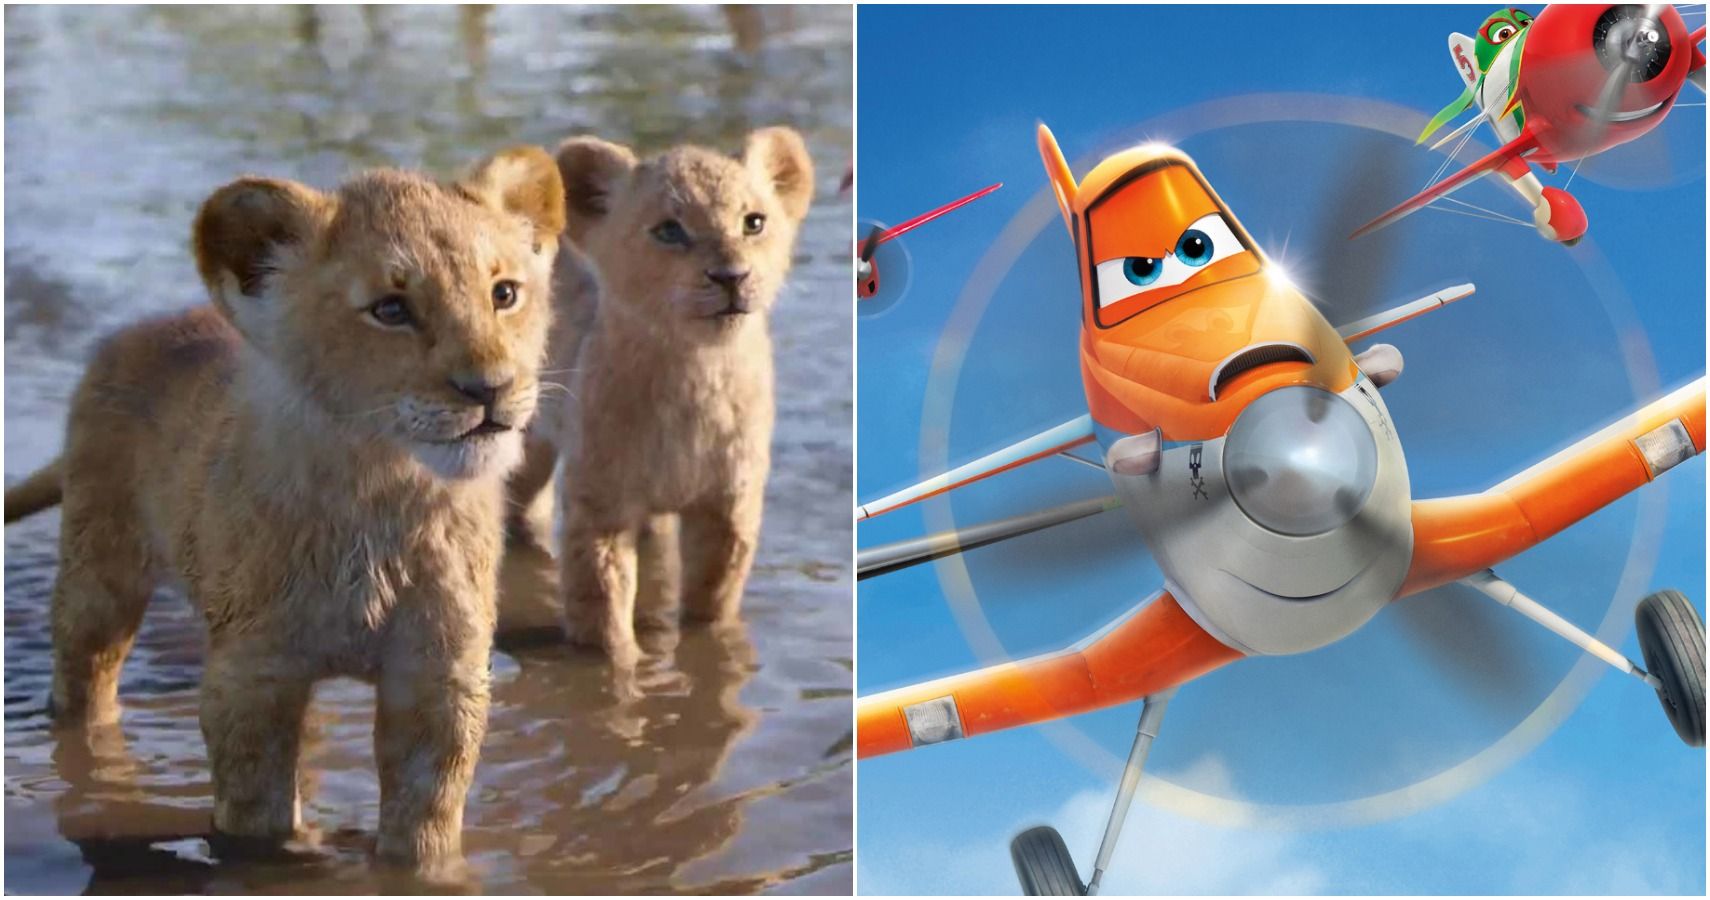 Disney: The 10 Worst Animated 2010s Movies (According To Rotten Tomatoes)